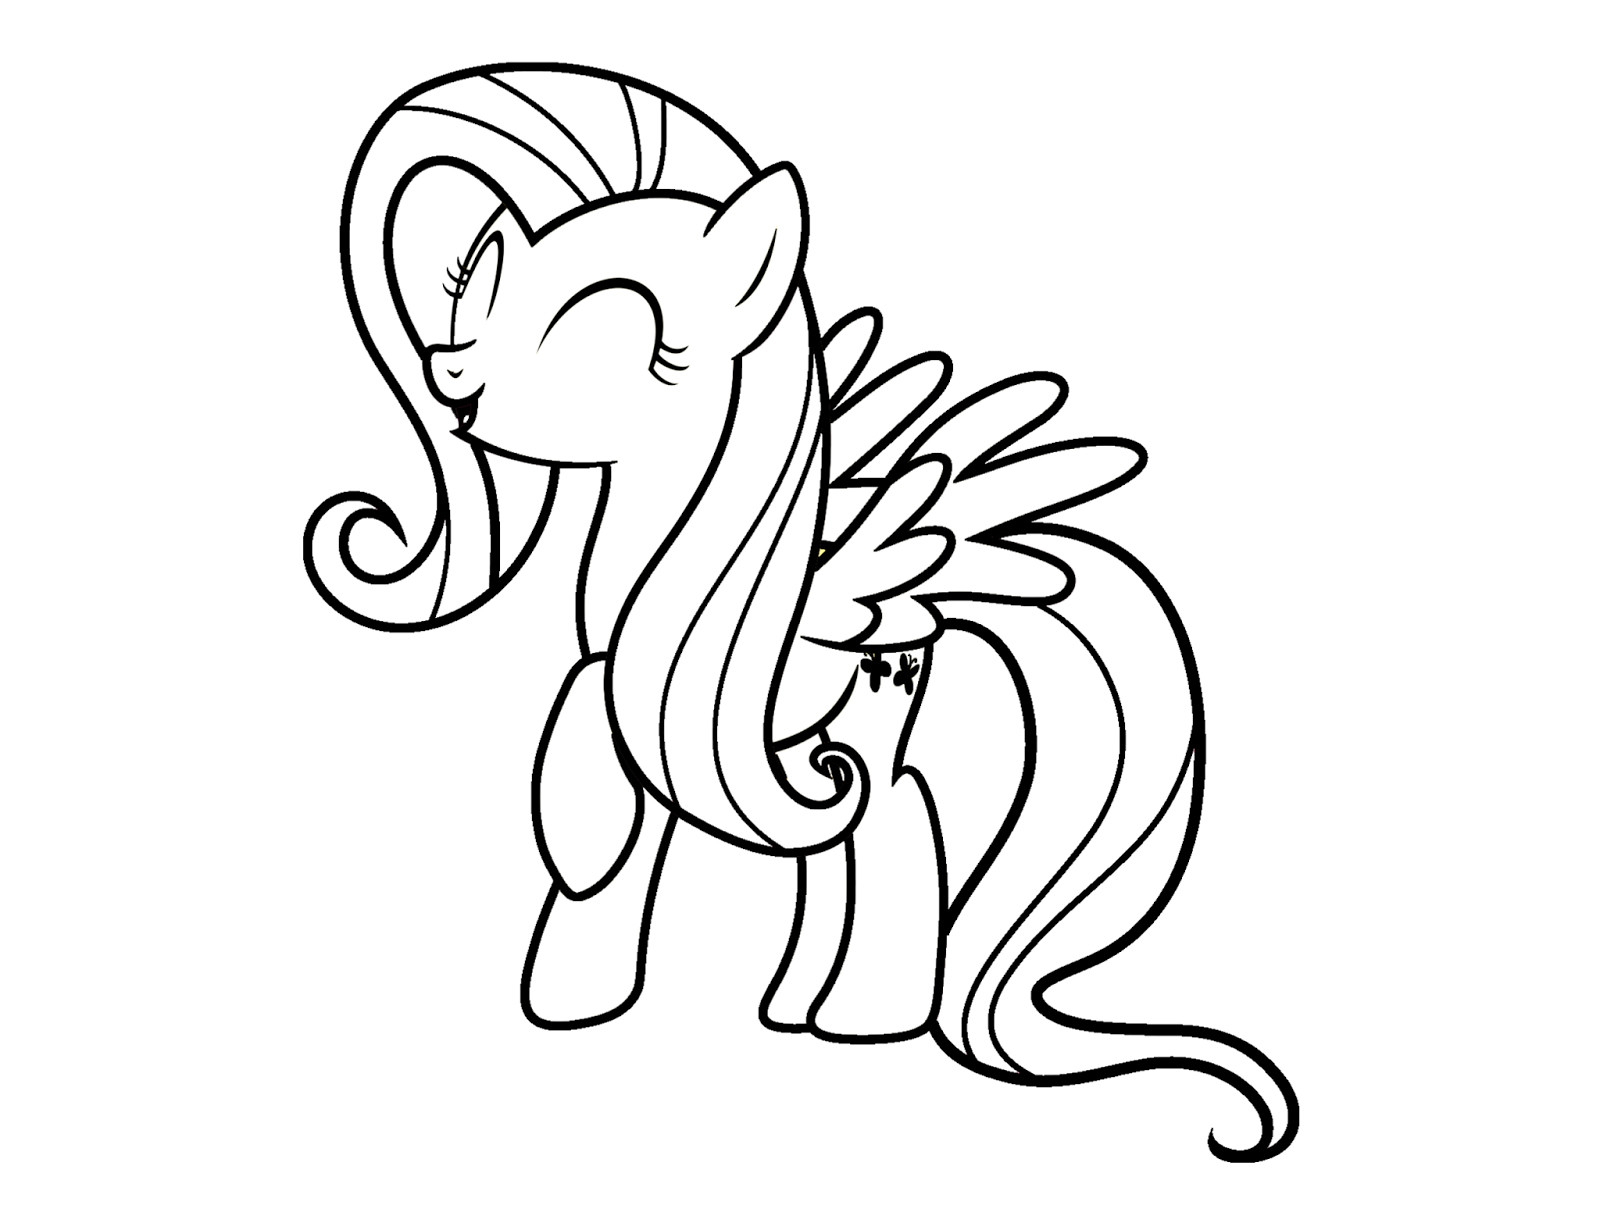 Coloring Pages For Toddlers Free
 Free my little pony coloring pages Coloring pages for kids